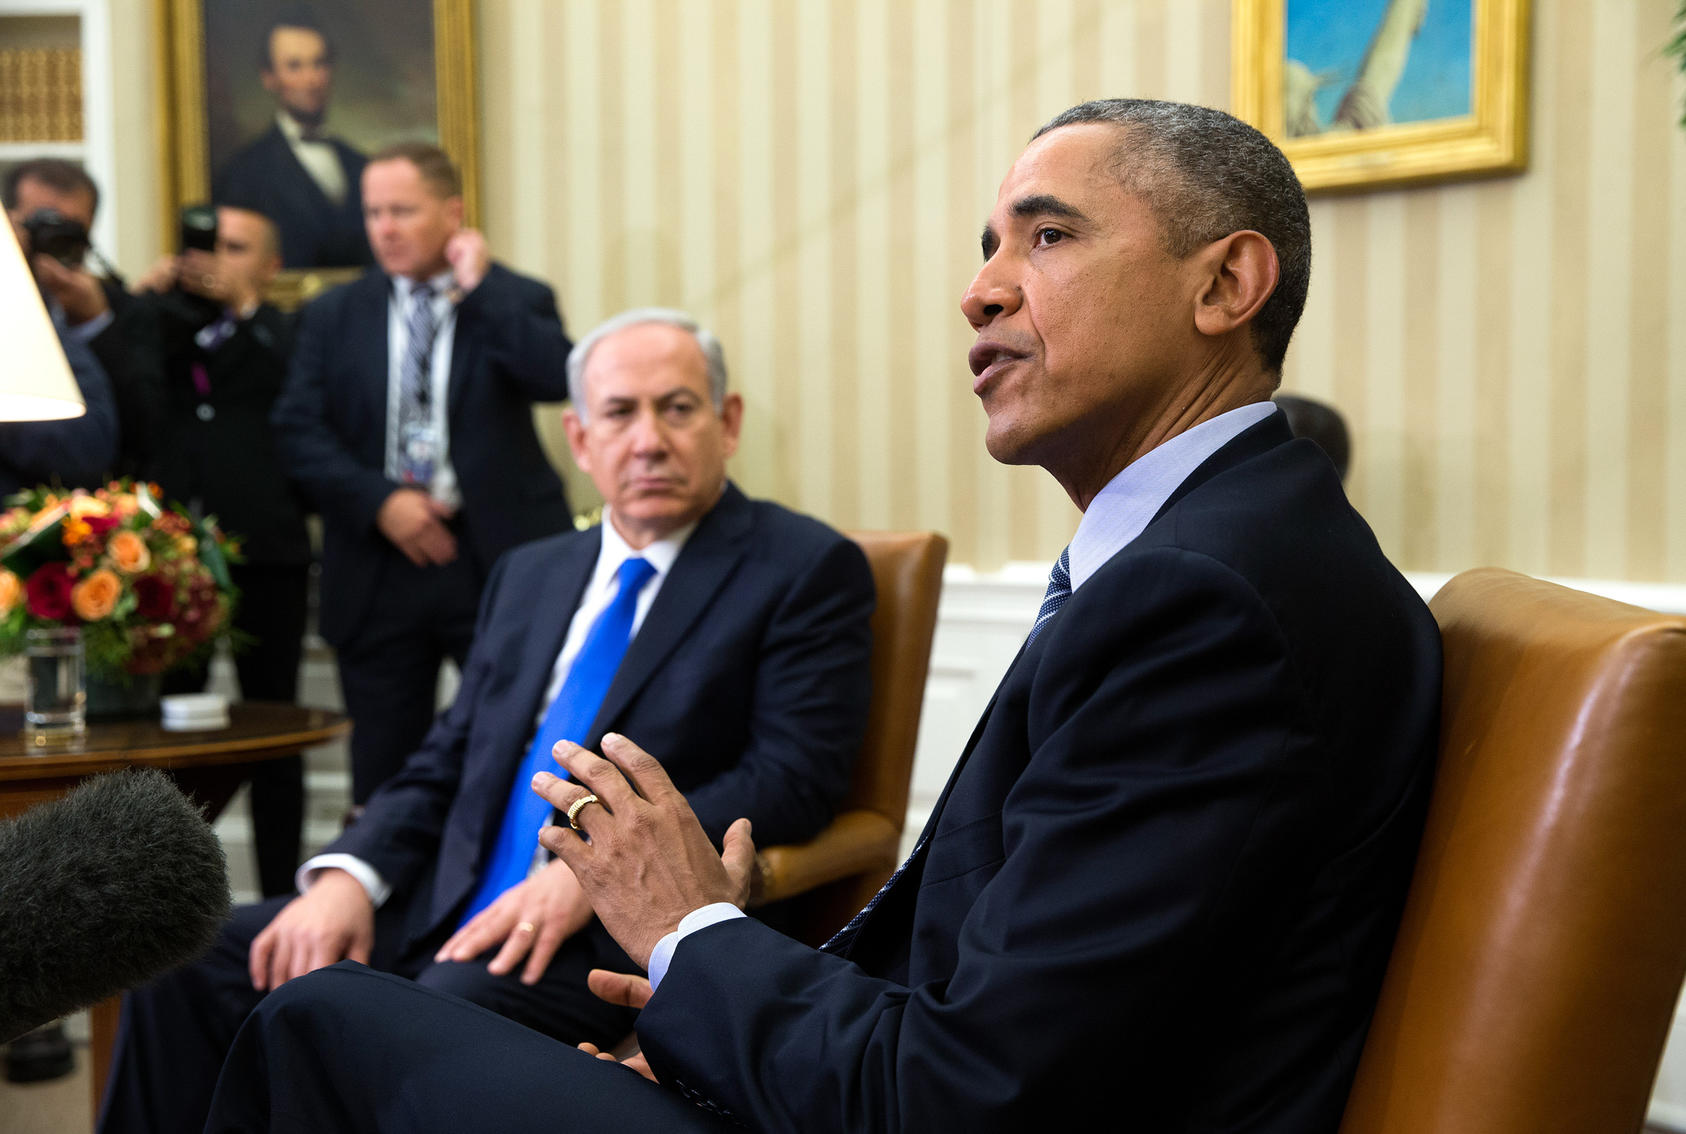 President Barack Obama speaks to reporters as Israeli Prime Minister Benjamin Netanyahu looks on during a bilateral meeting in the Oval Office of the White House, in Washington, Nov. 9, 2015. After months of long-distance jousting over the Iran nuclear deal, Obama and Netanyahu met Monday for the first time in more than a year to try and put their feuding behind them